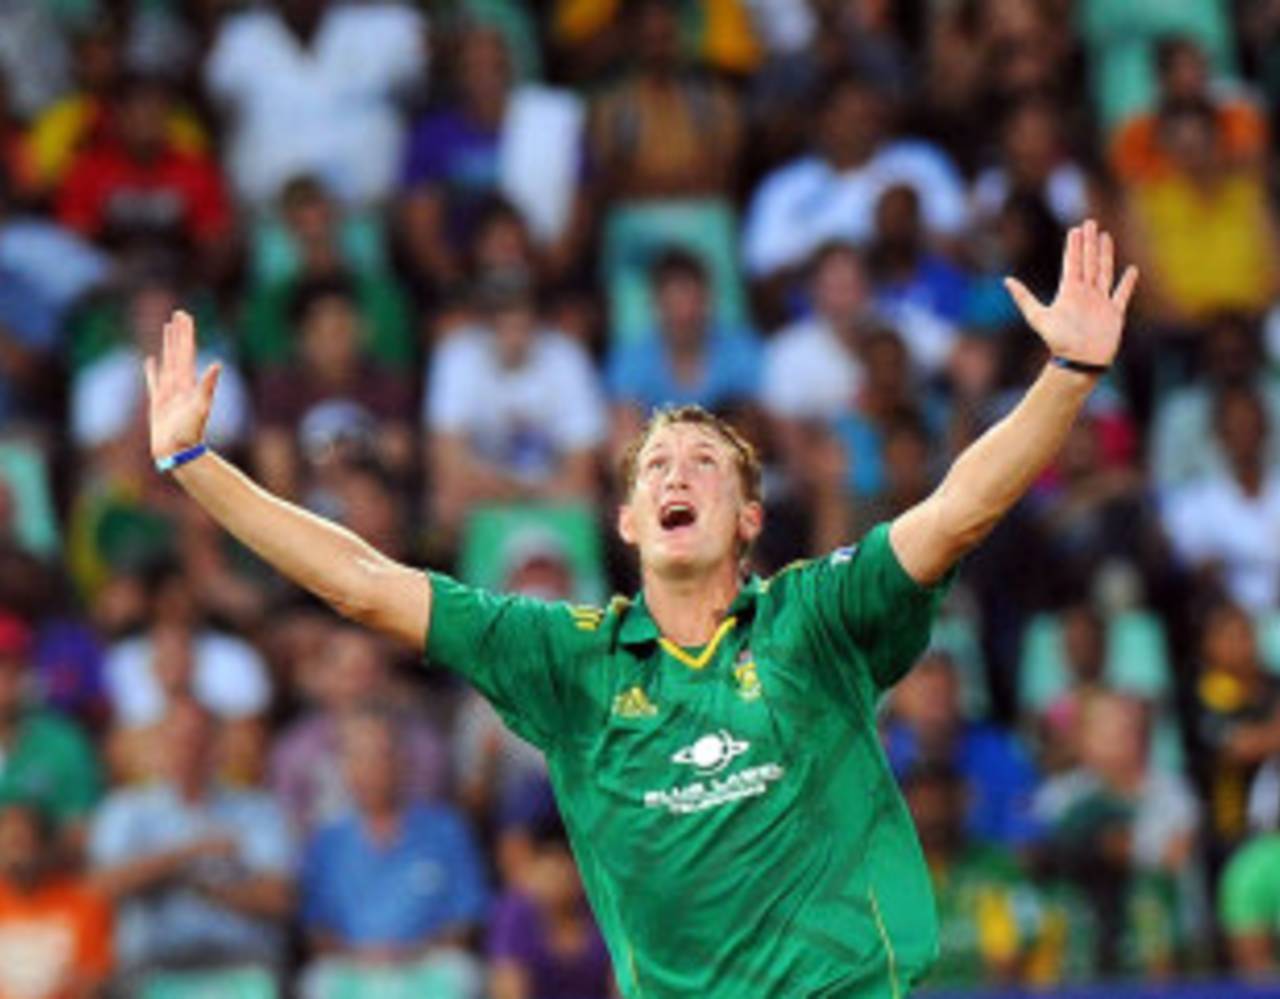 Chris Morris took two wickets on debut but picked up an injury, South Africa v New Zealand, 1st Twenty20 international, Durban, December 21, 2012